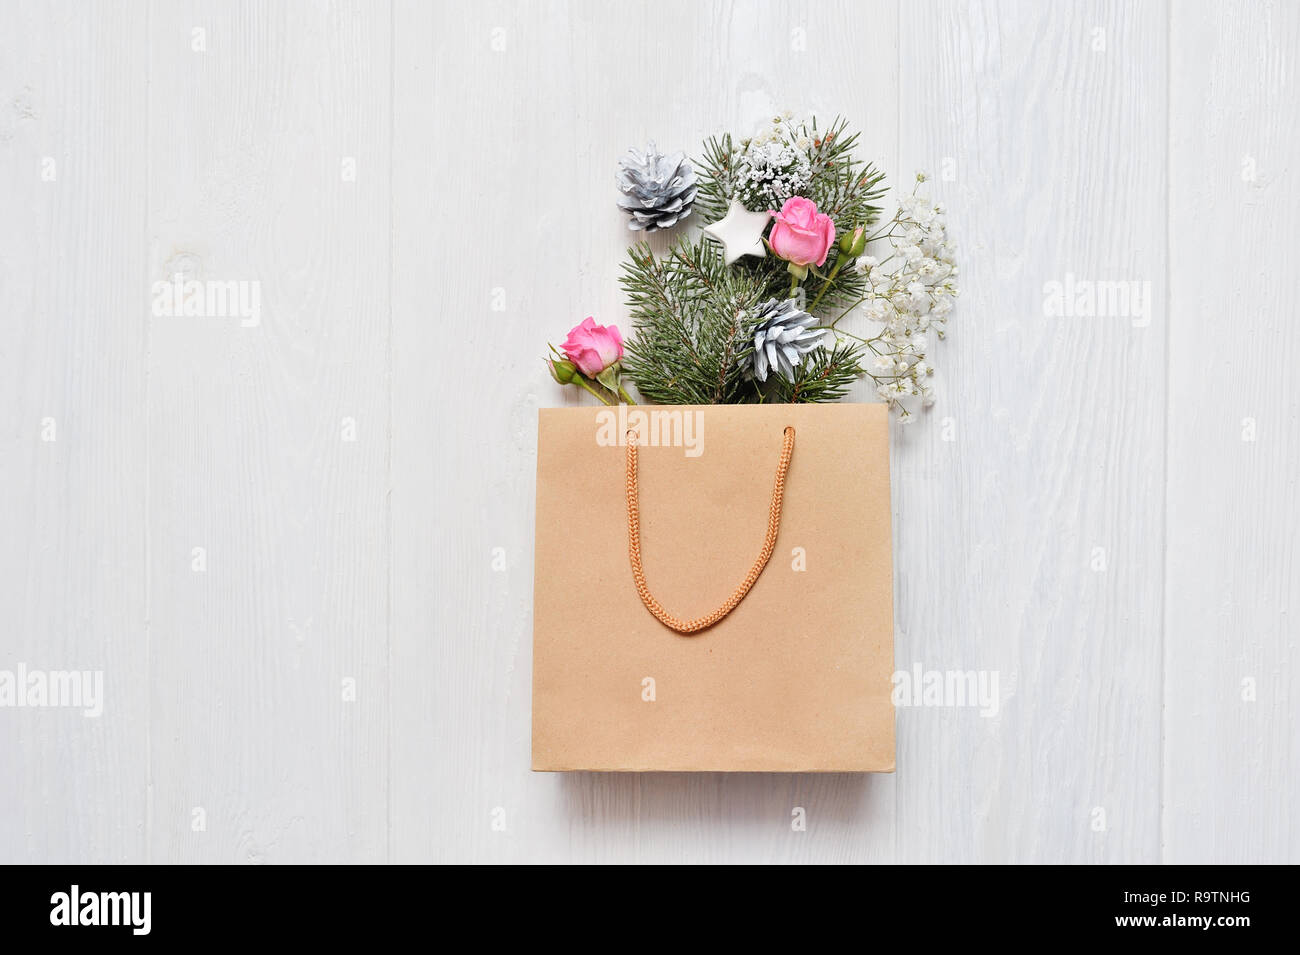 Christmas mockup. Kraft package with xmas decor fir branches, pink roses, cones with place for your text. Shopping concept Stock Photo